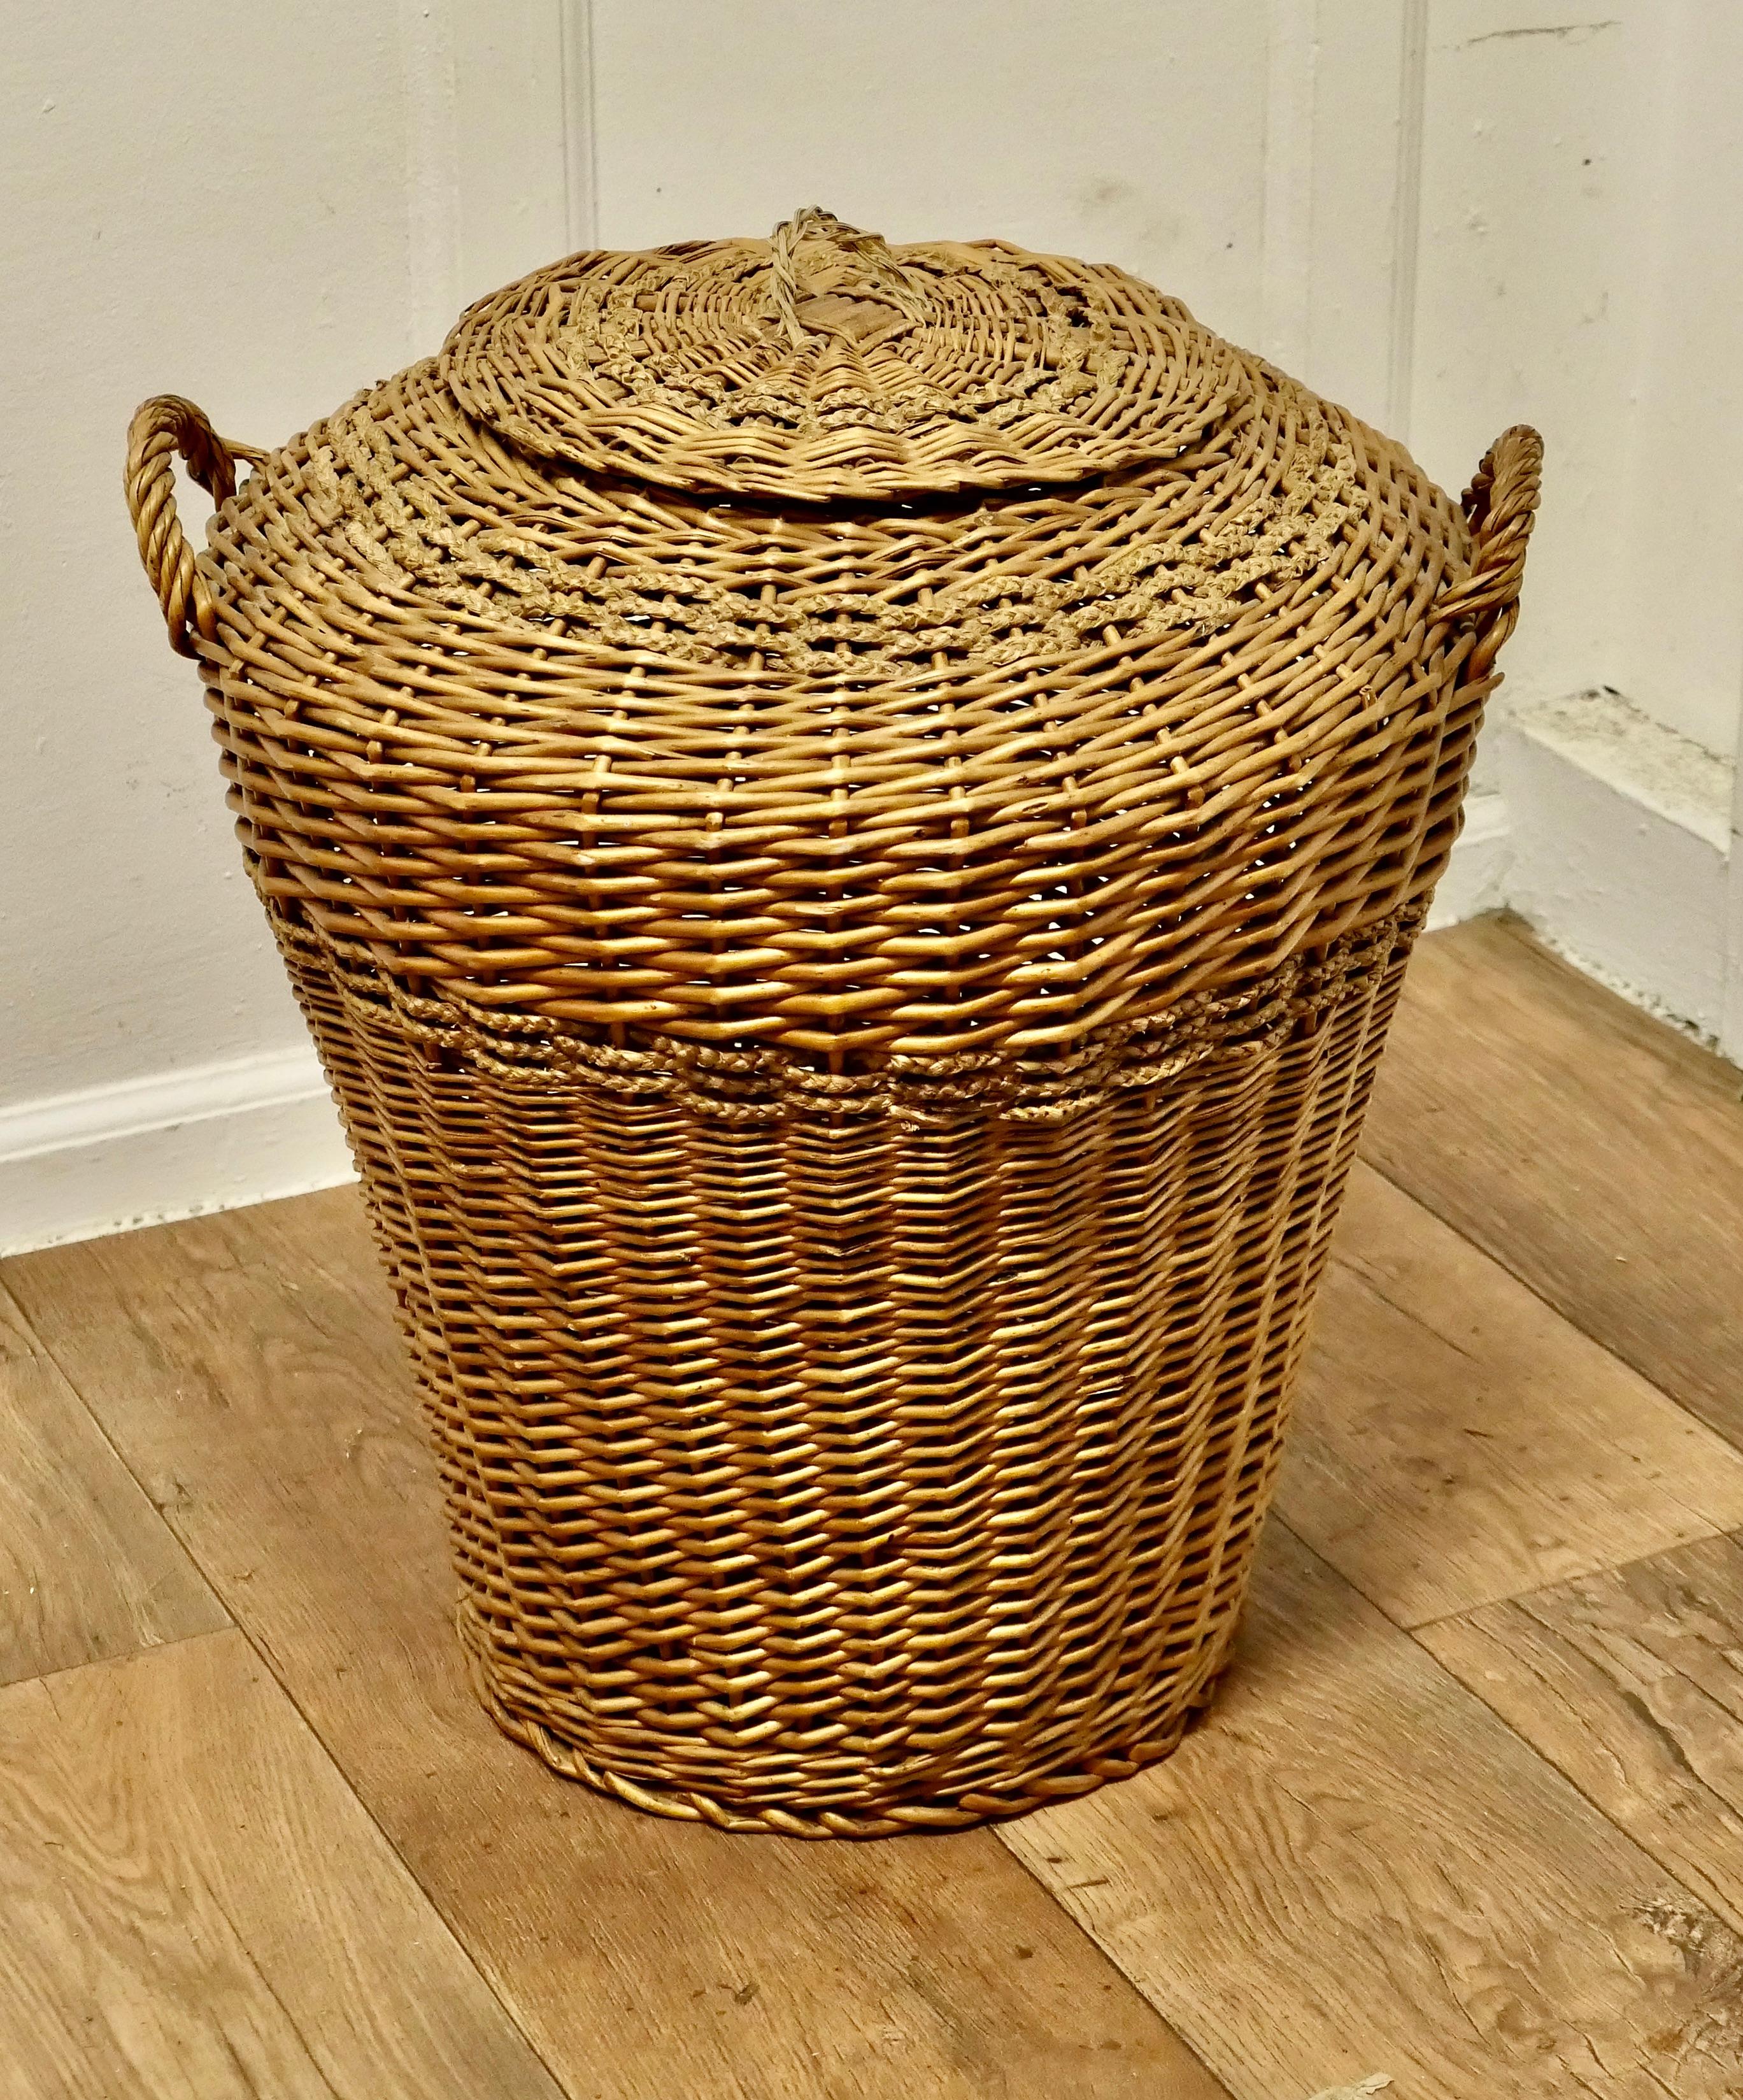 Tall Antique Ali Baba Wicker Laundry Basket

This is an excellent example and in remarkably good condition for its age, the basket is round, tall with strong carrying handles and a lid.
It is woven in age darkened Willow and decorative sea grass